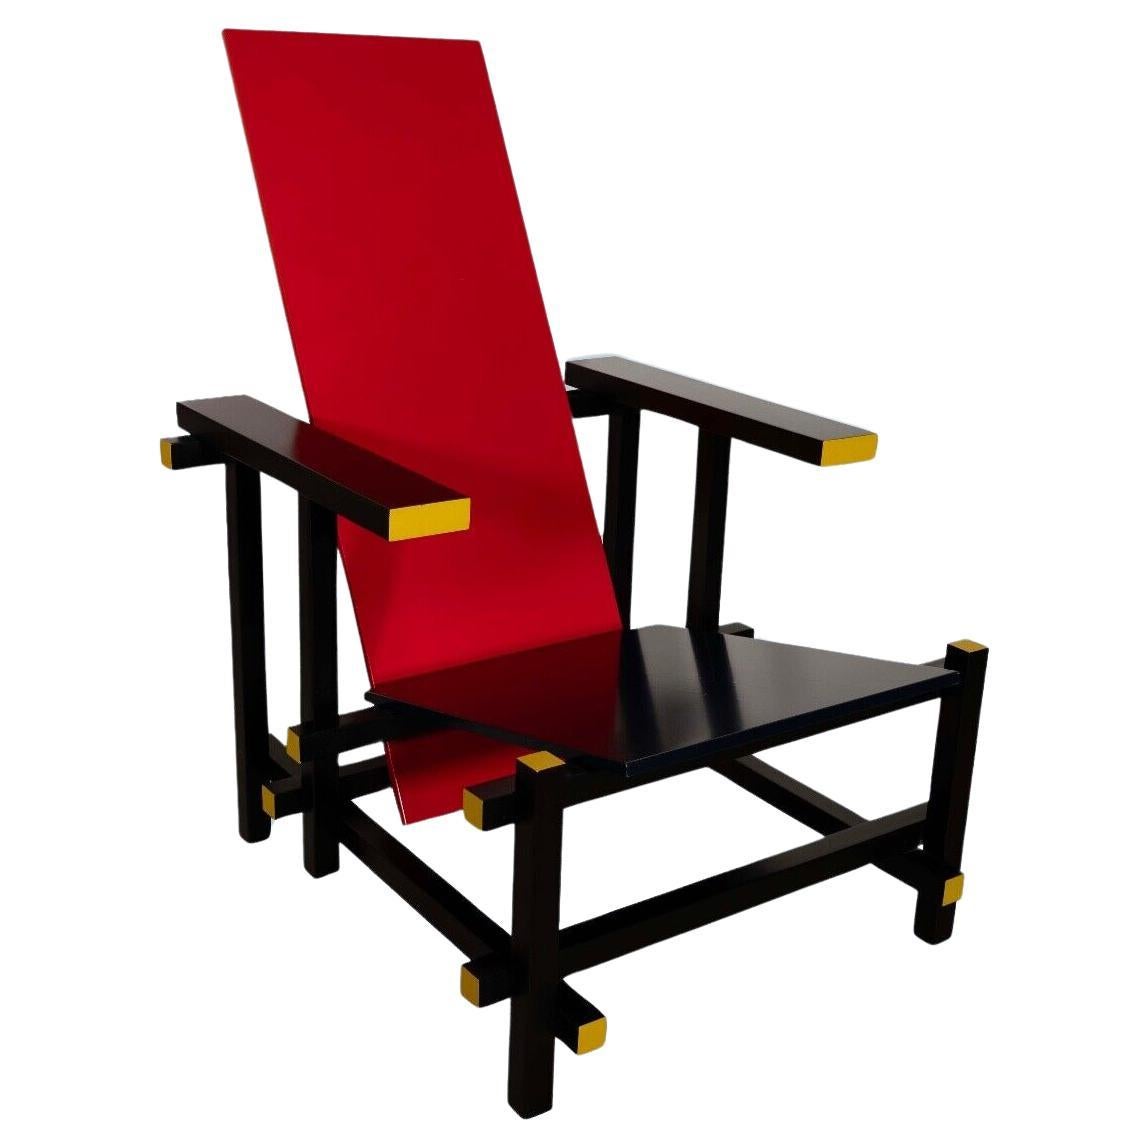 Cassina Red Blue and Yellow Chair Gerrit Thomas Rietvild Post Modern For Sale